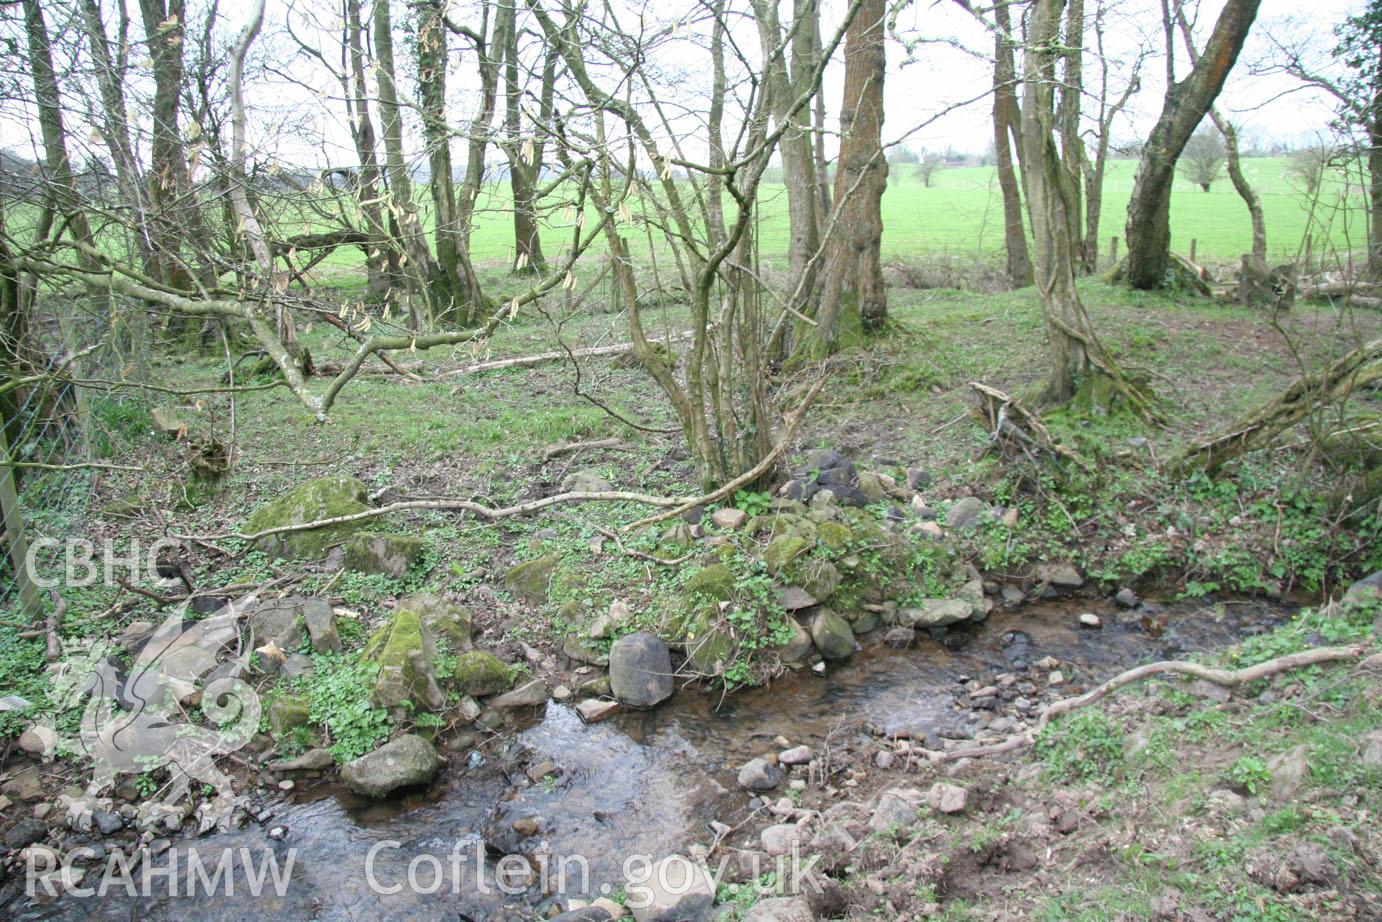 Stream and woods on proposed development site. Digital colour photograph taken during site visit to land south of school lane, Penperlleni. Part of Archaeological Desk Based Assessment conducted by Iestyn Jones of Archaeology Wales, 2014.